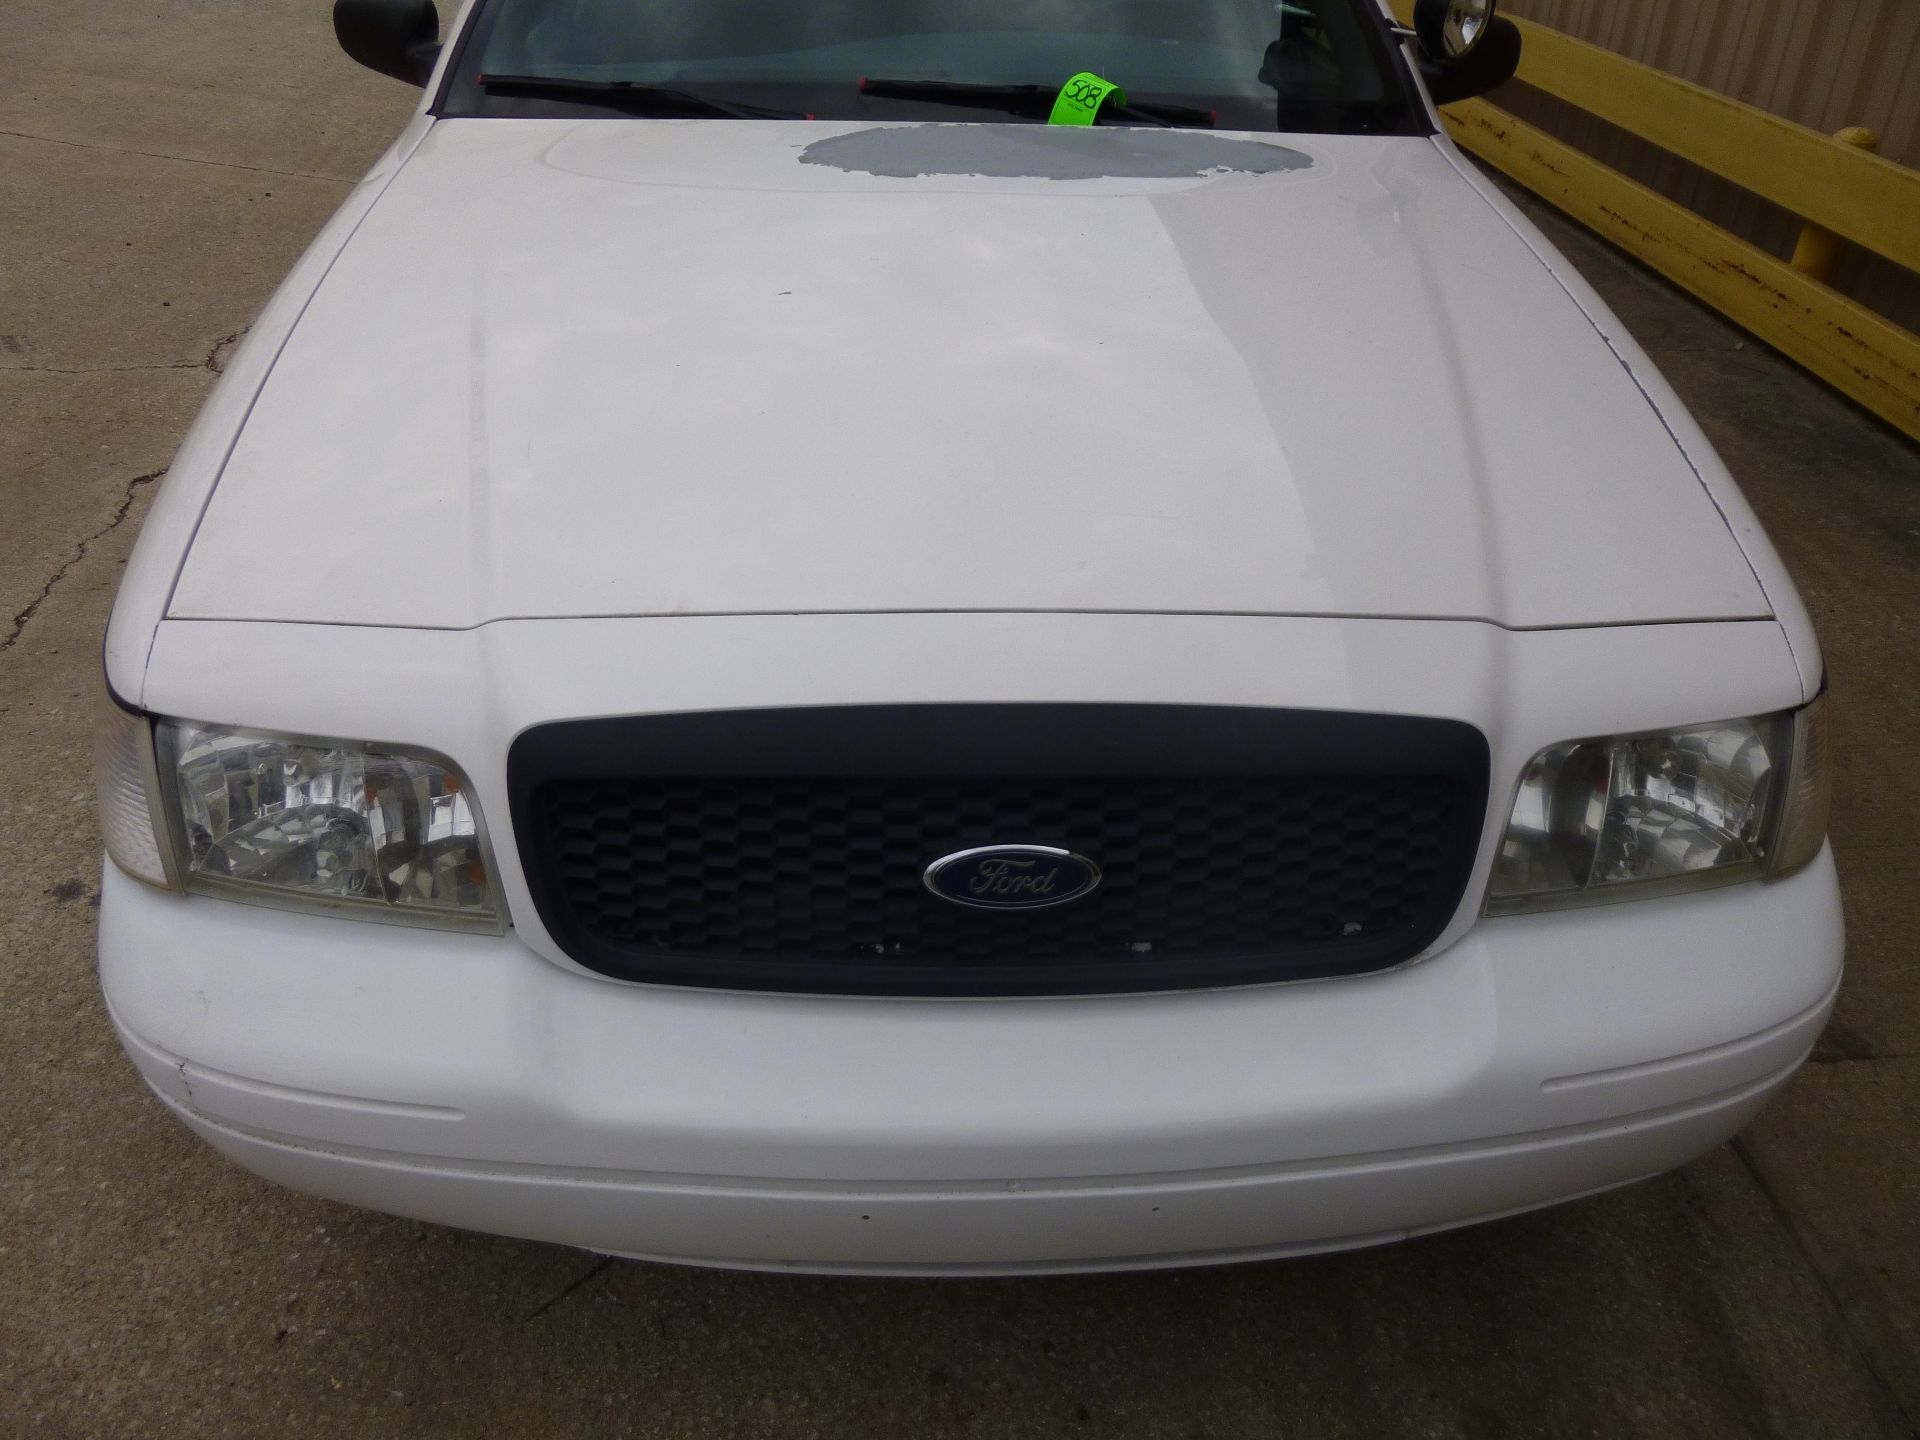 2002 Ford Crown Victoria Police Interceptor miles 112174 Vin # 2FAFP71W32X136232 CLEAR TITLE( - Image 3 of 10